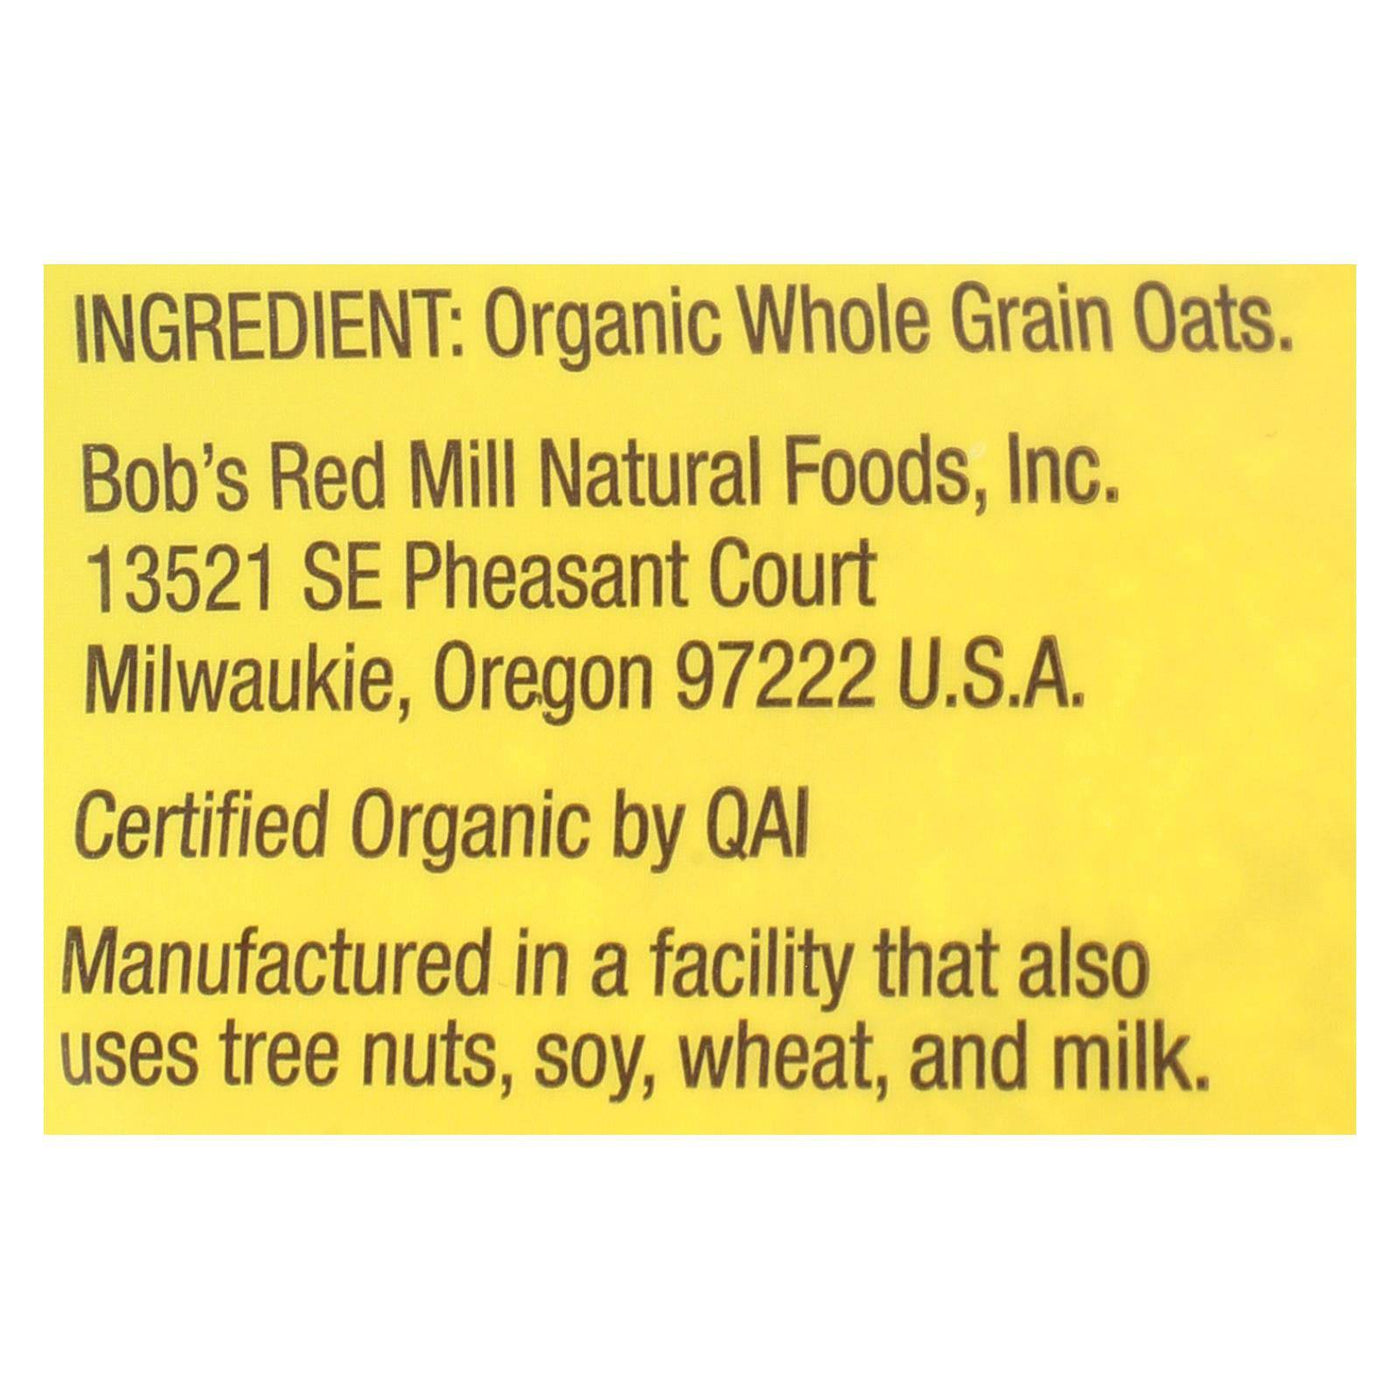 Bob's Red Mill - Oatmeal - Organic Scottish  - Case Of 4 - 20 Oz. | OnlyNaturals.us